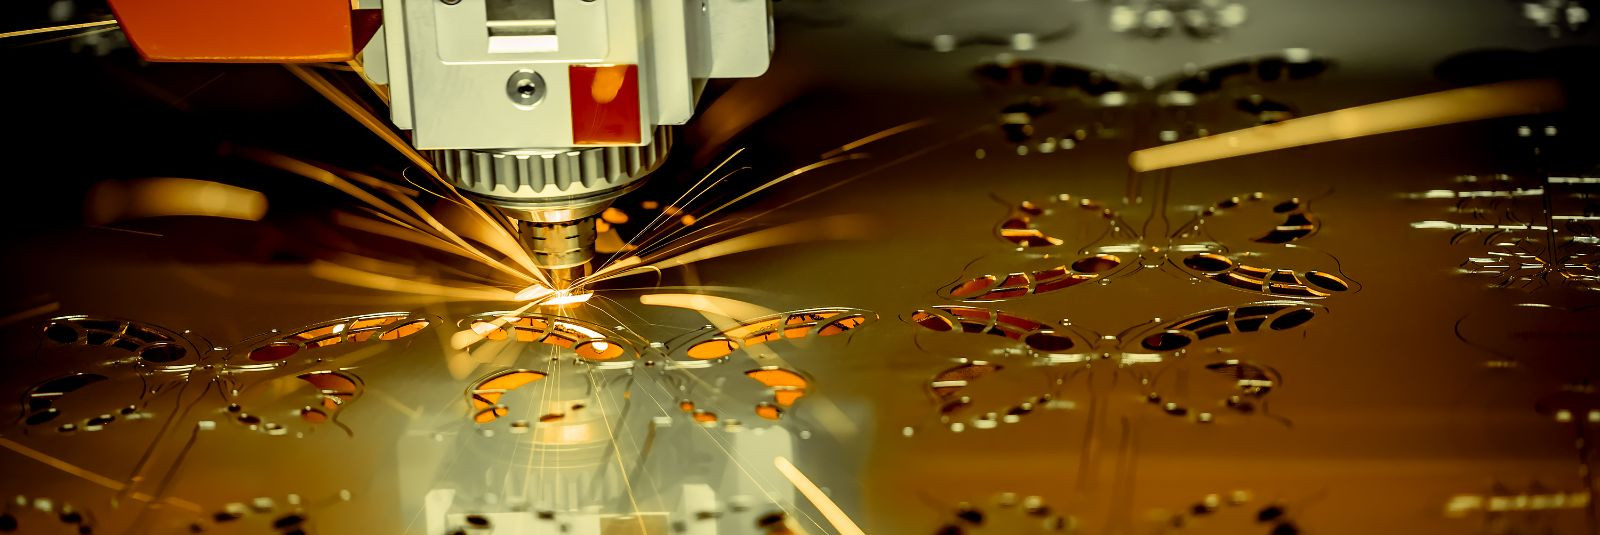 When it comes to sheet metal fabrication, precision and efficiency ...